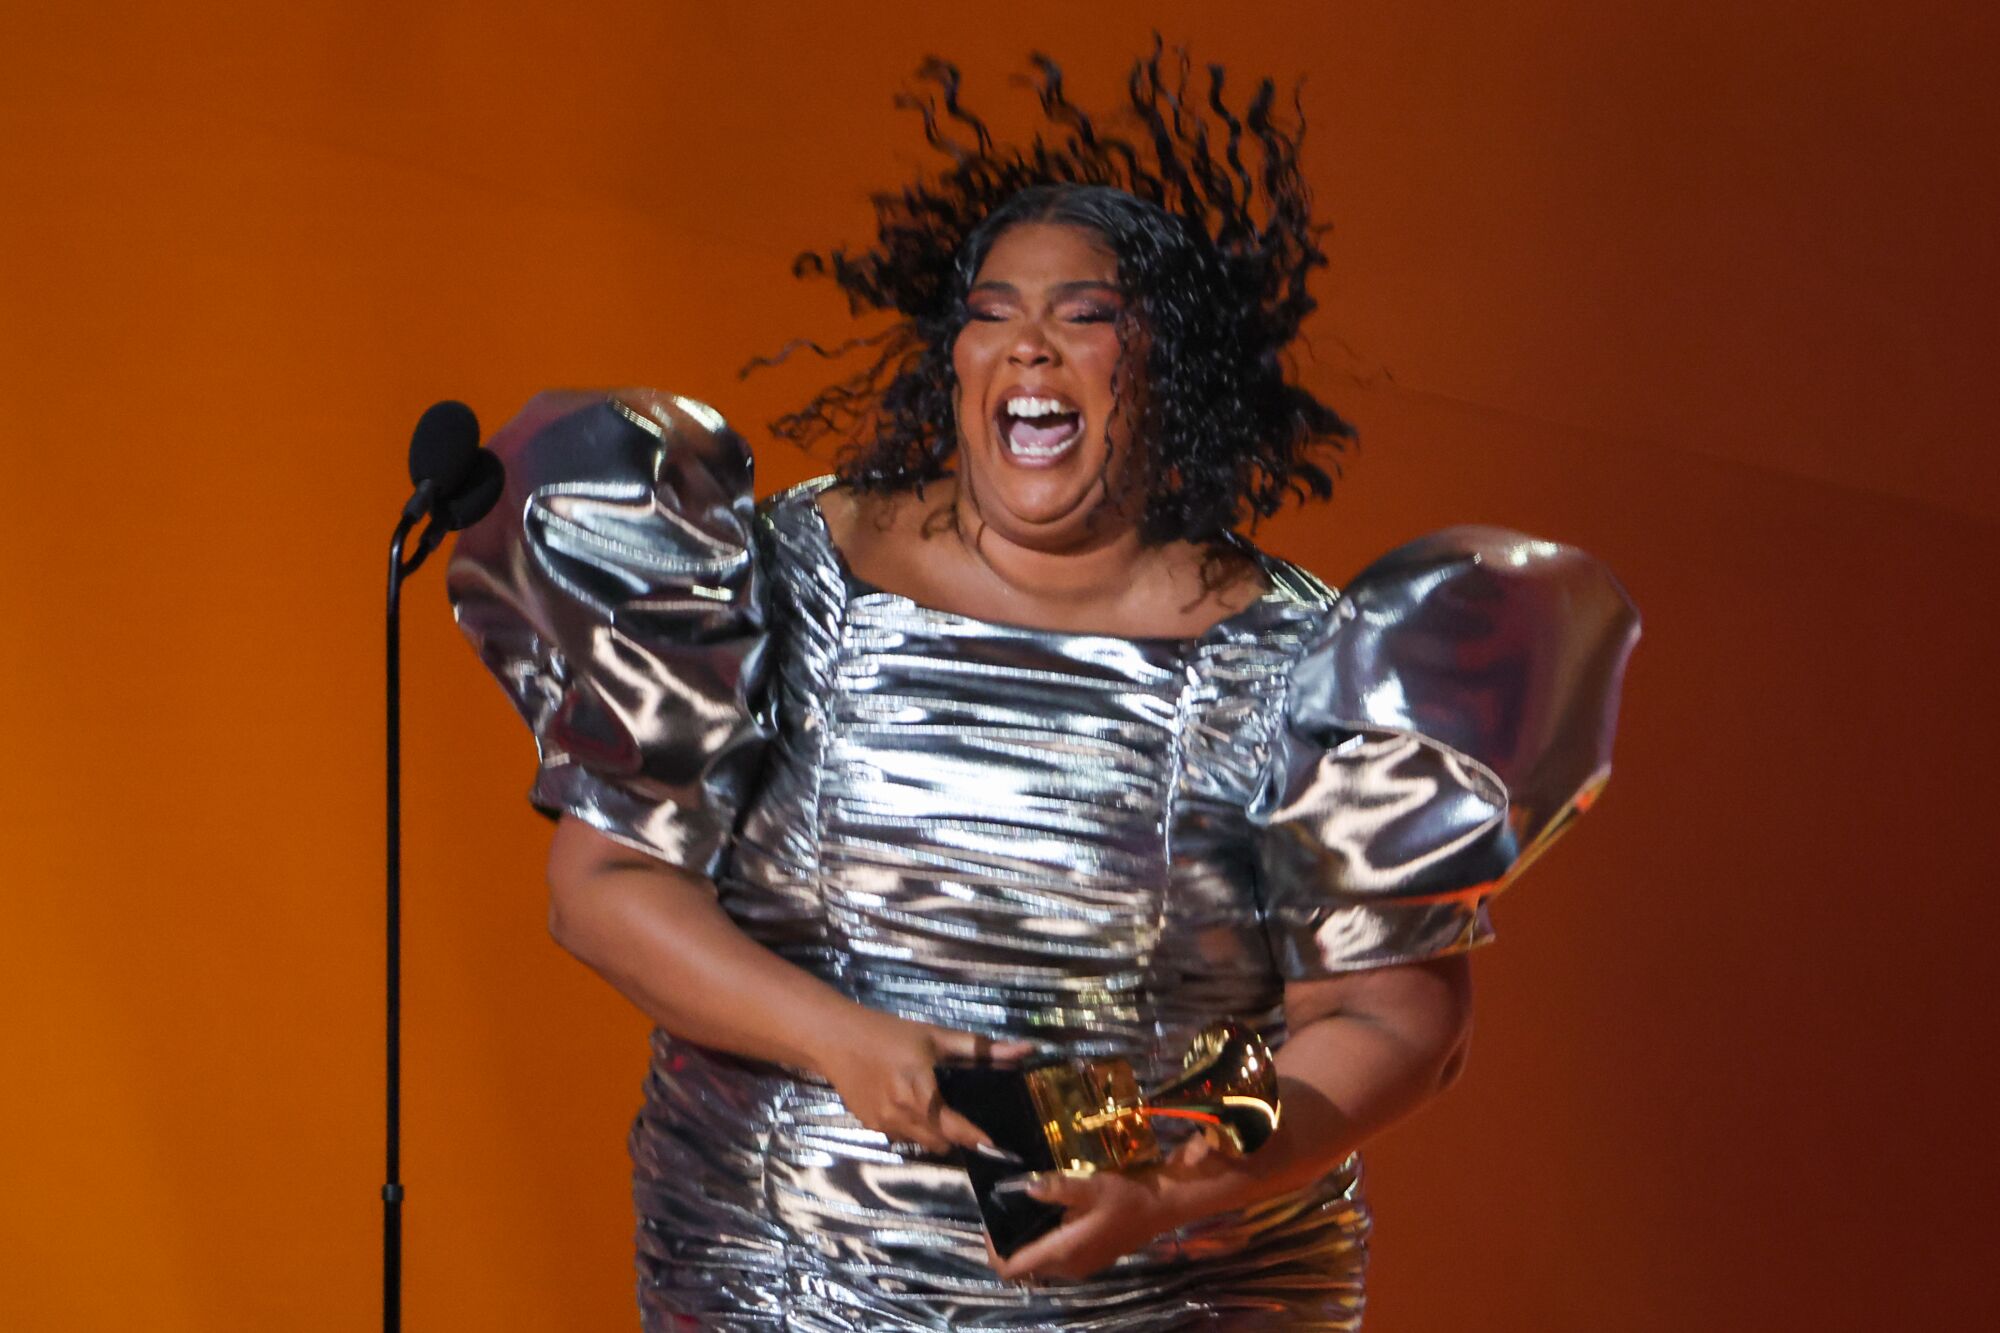 Lizzo accepts the award for record of the year at the 65th Grammy Awards, held at the Crytpo.com Arena.